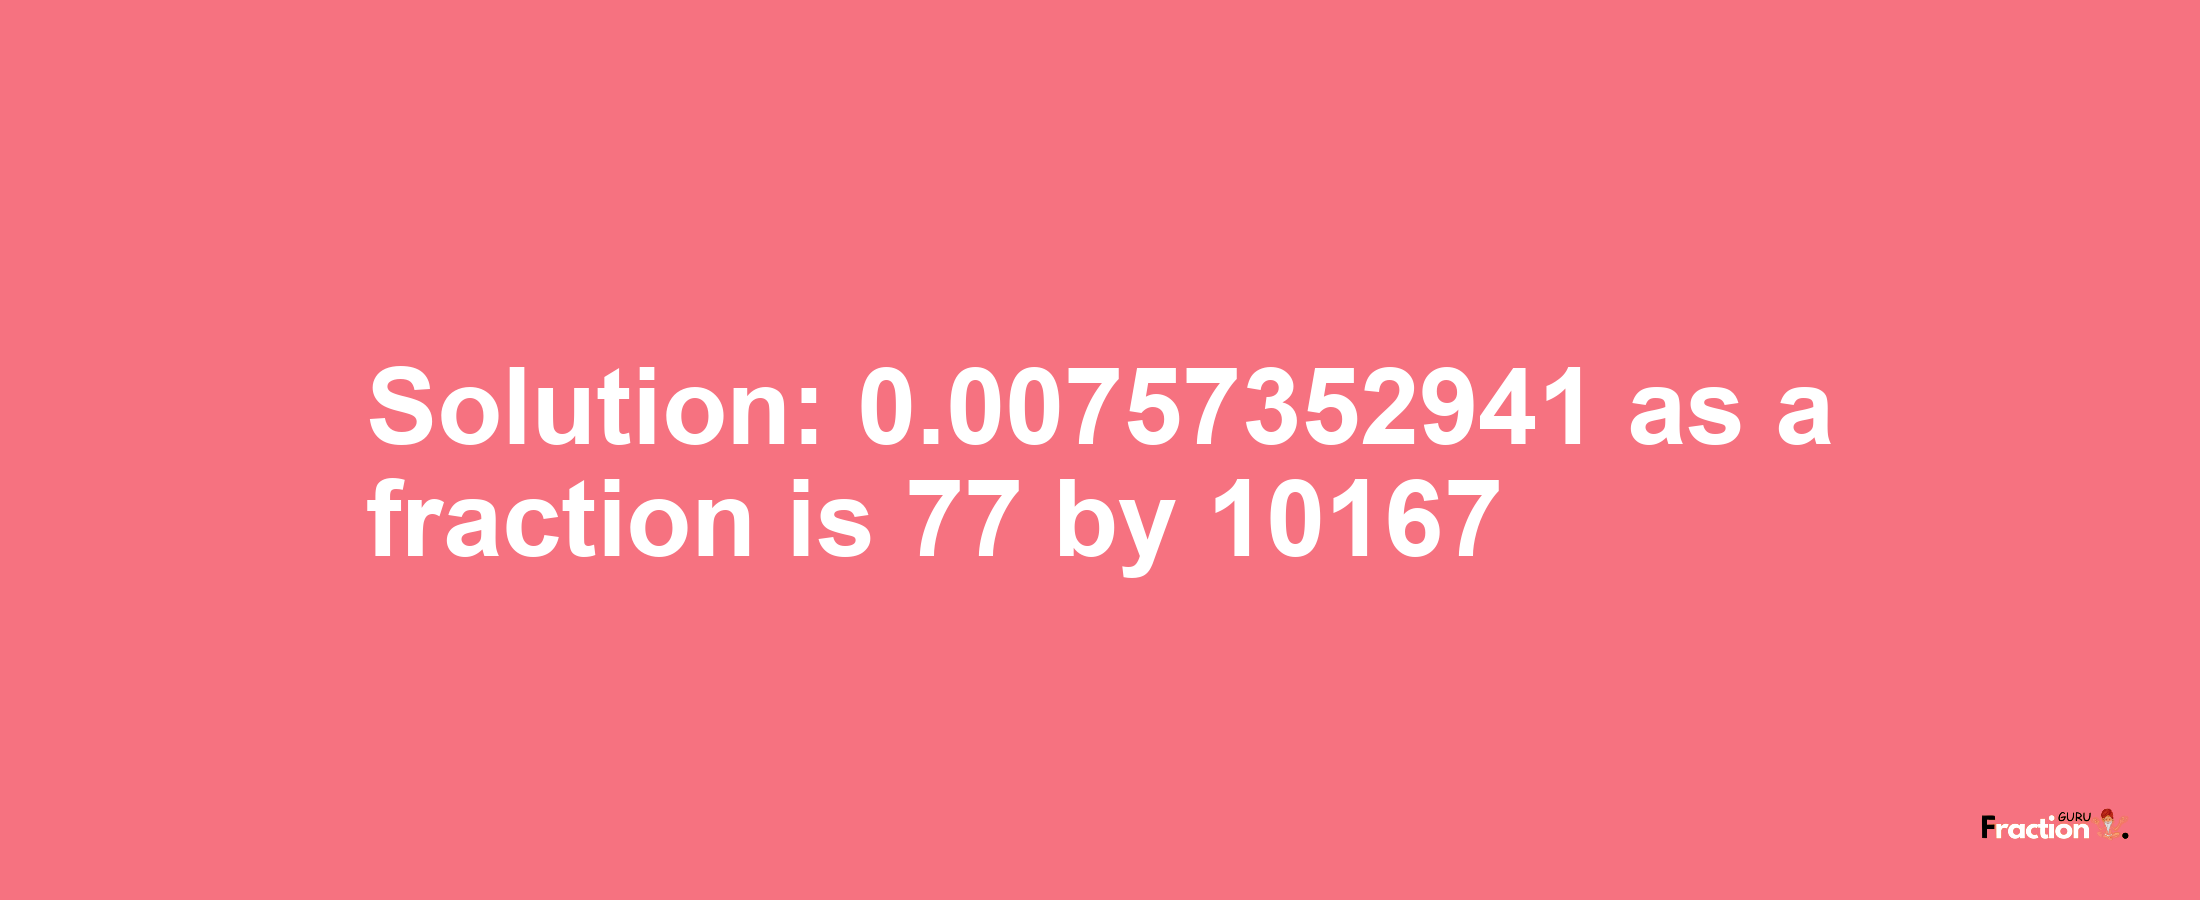 Solution:0.00757352941 as a fraction is 77/10167